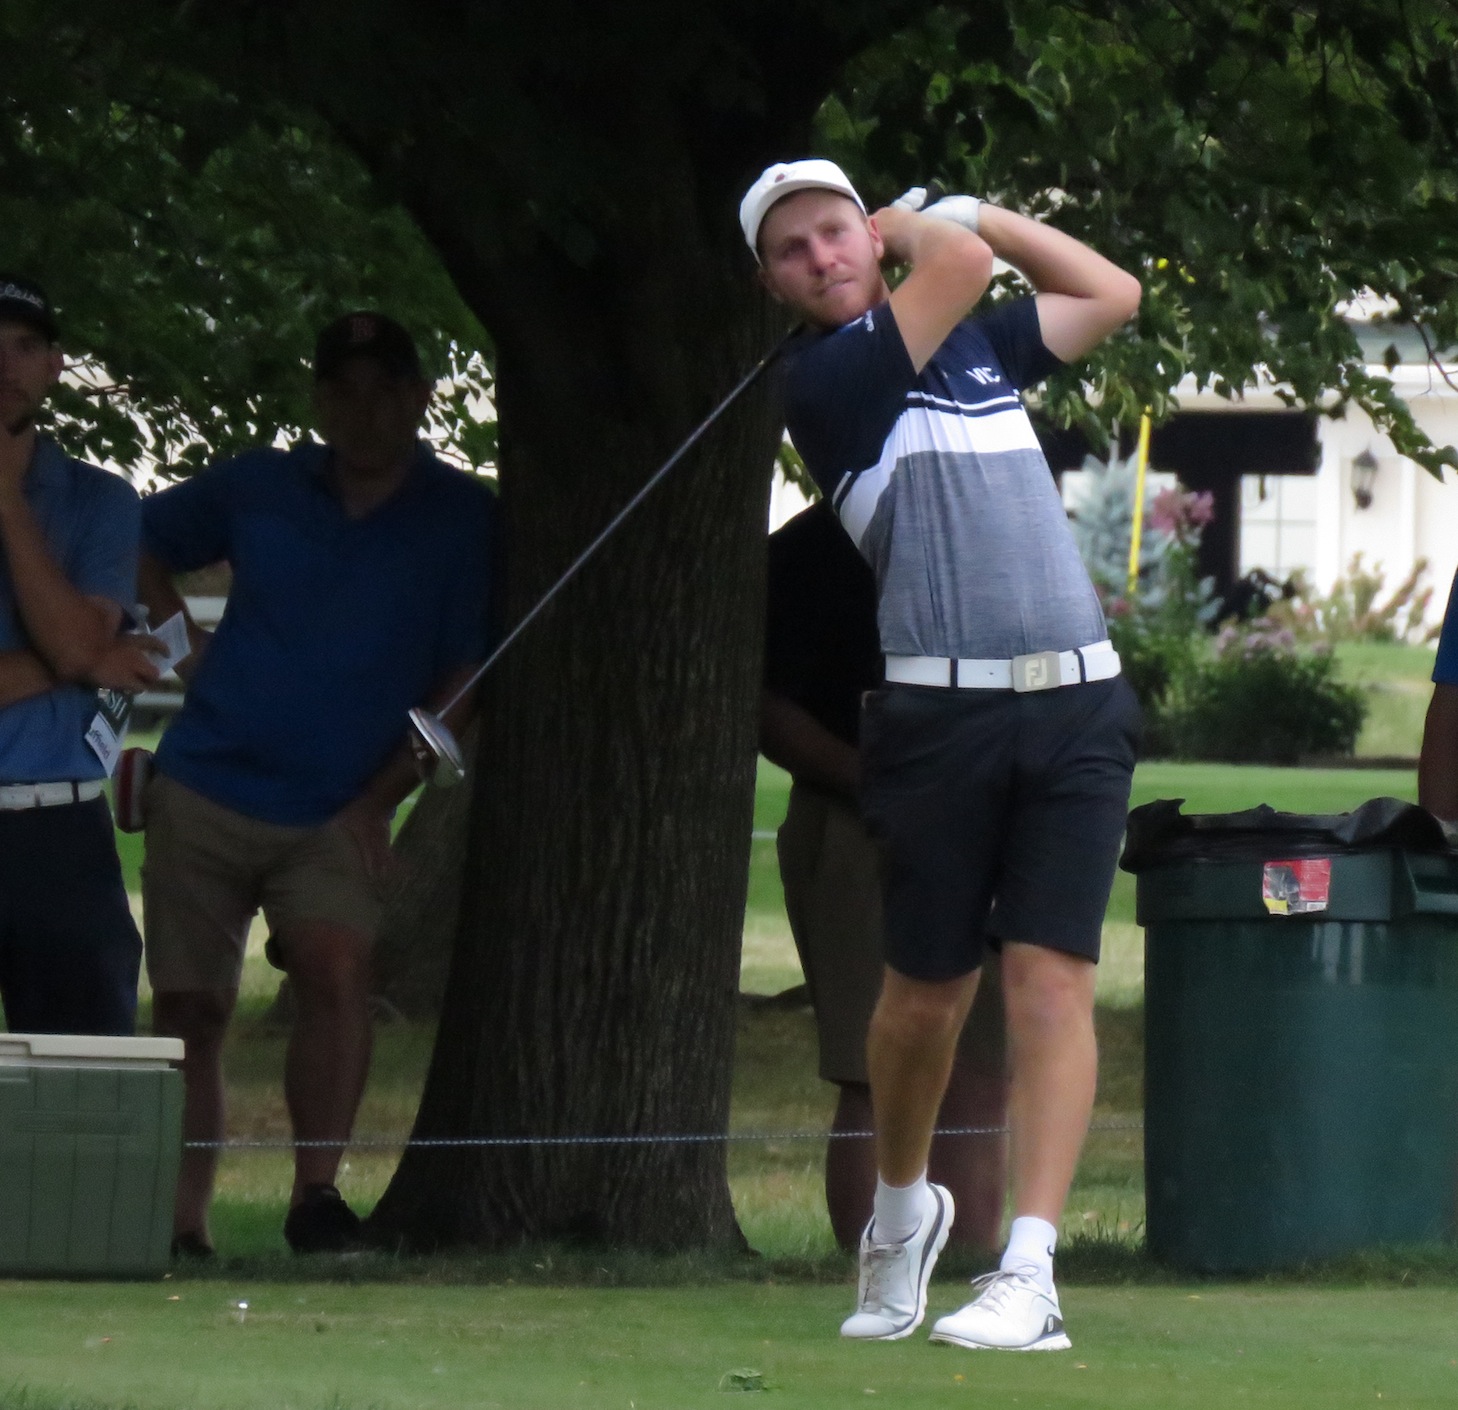 Pictured, Aiden Didone, the 2019 Porter Cup champion, takes some shots at Niagara Falls Country Club during Saturday's final round (Photos by David Yarger)